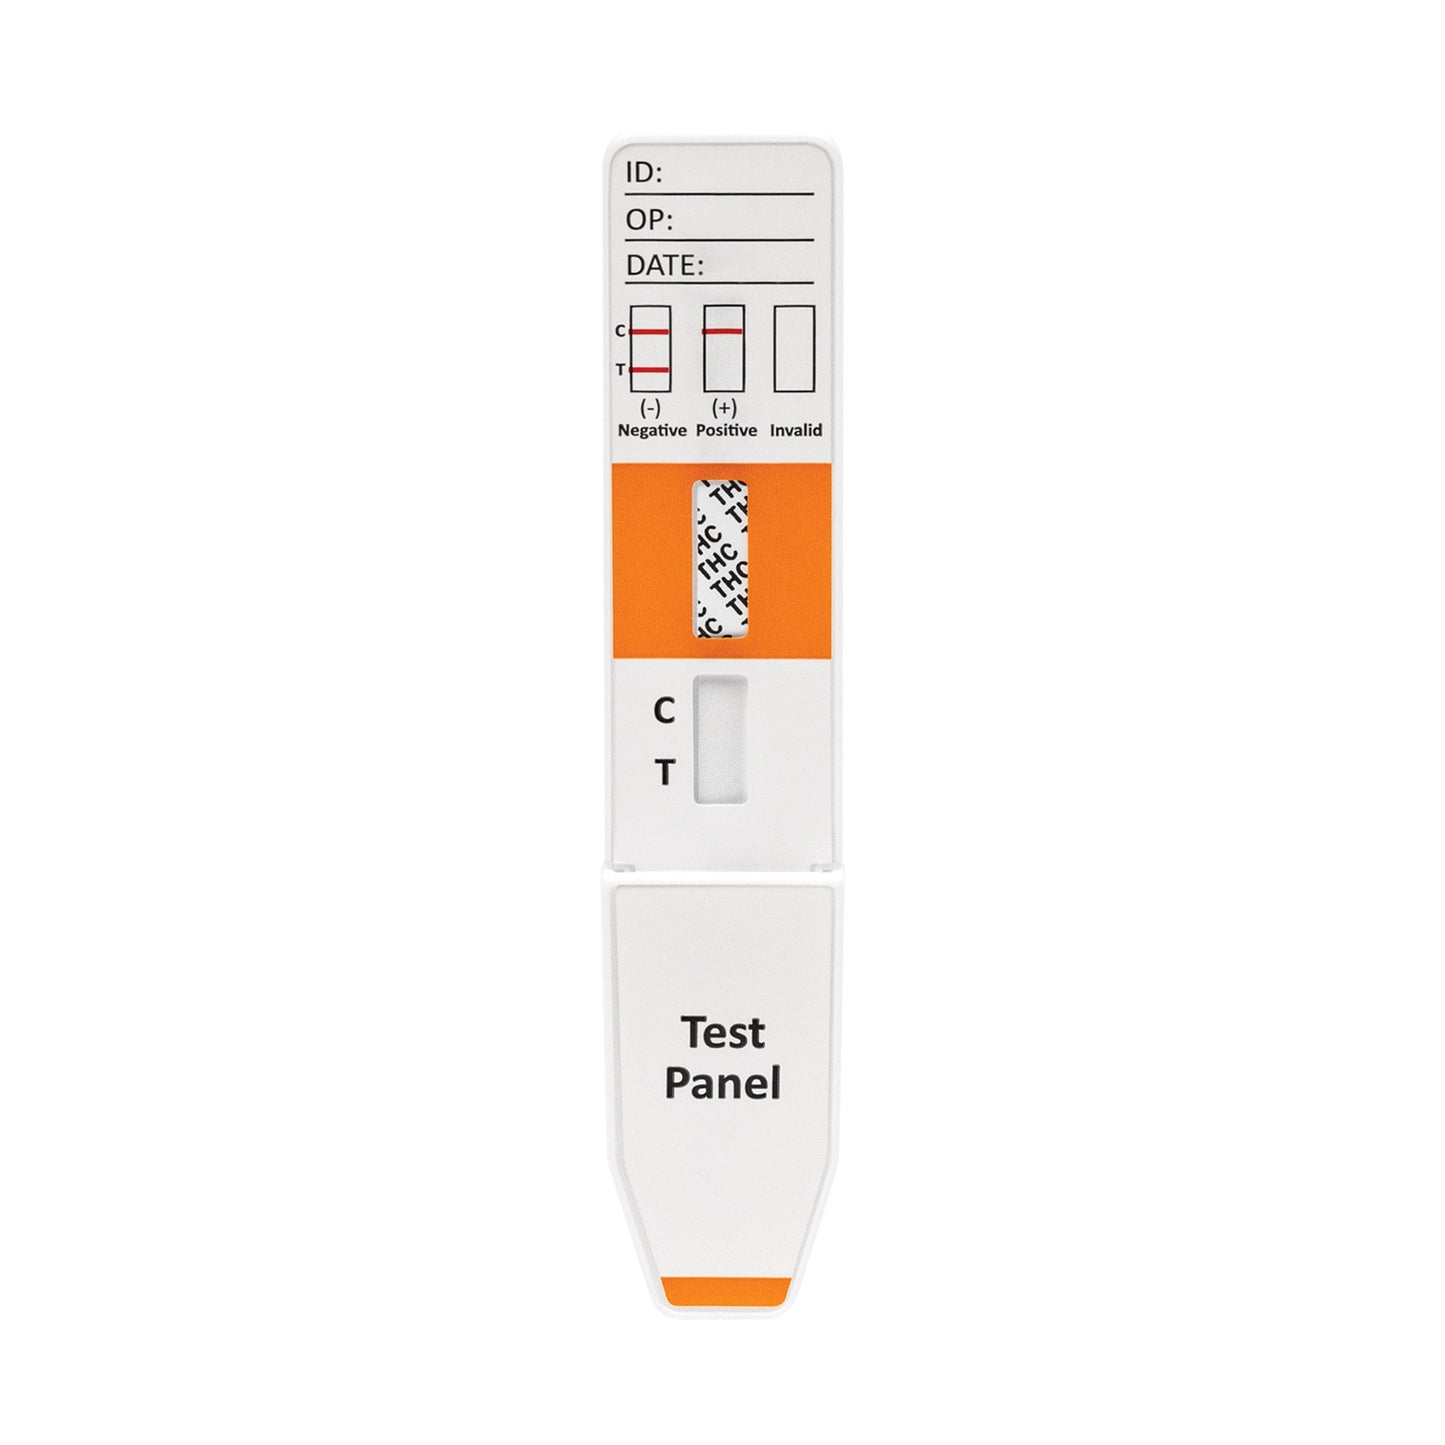 Surestep™ Powder Test Drug Screen Panel (Mop) - (Image Differs From Product)